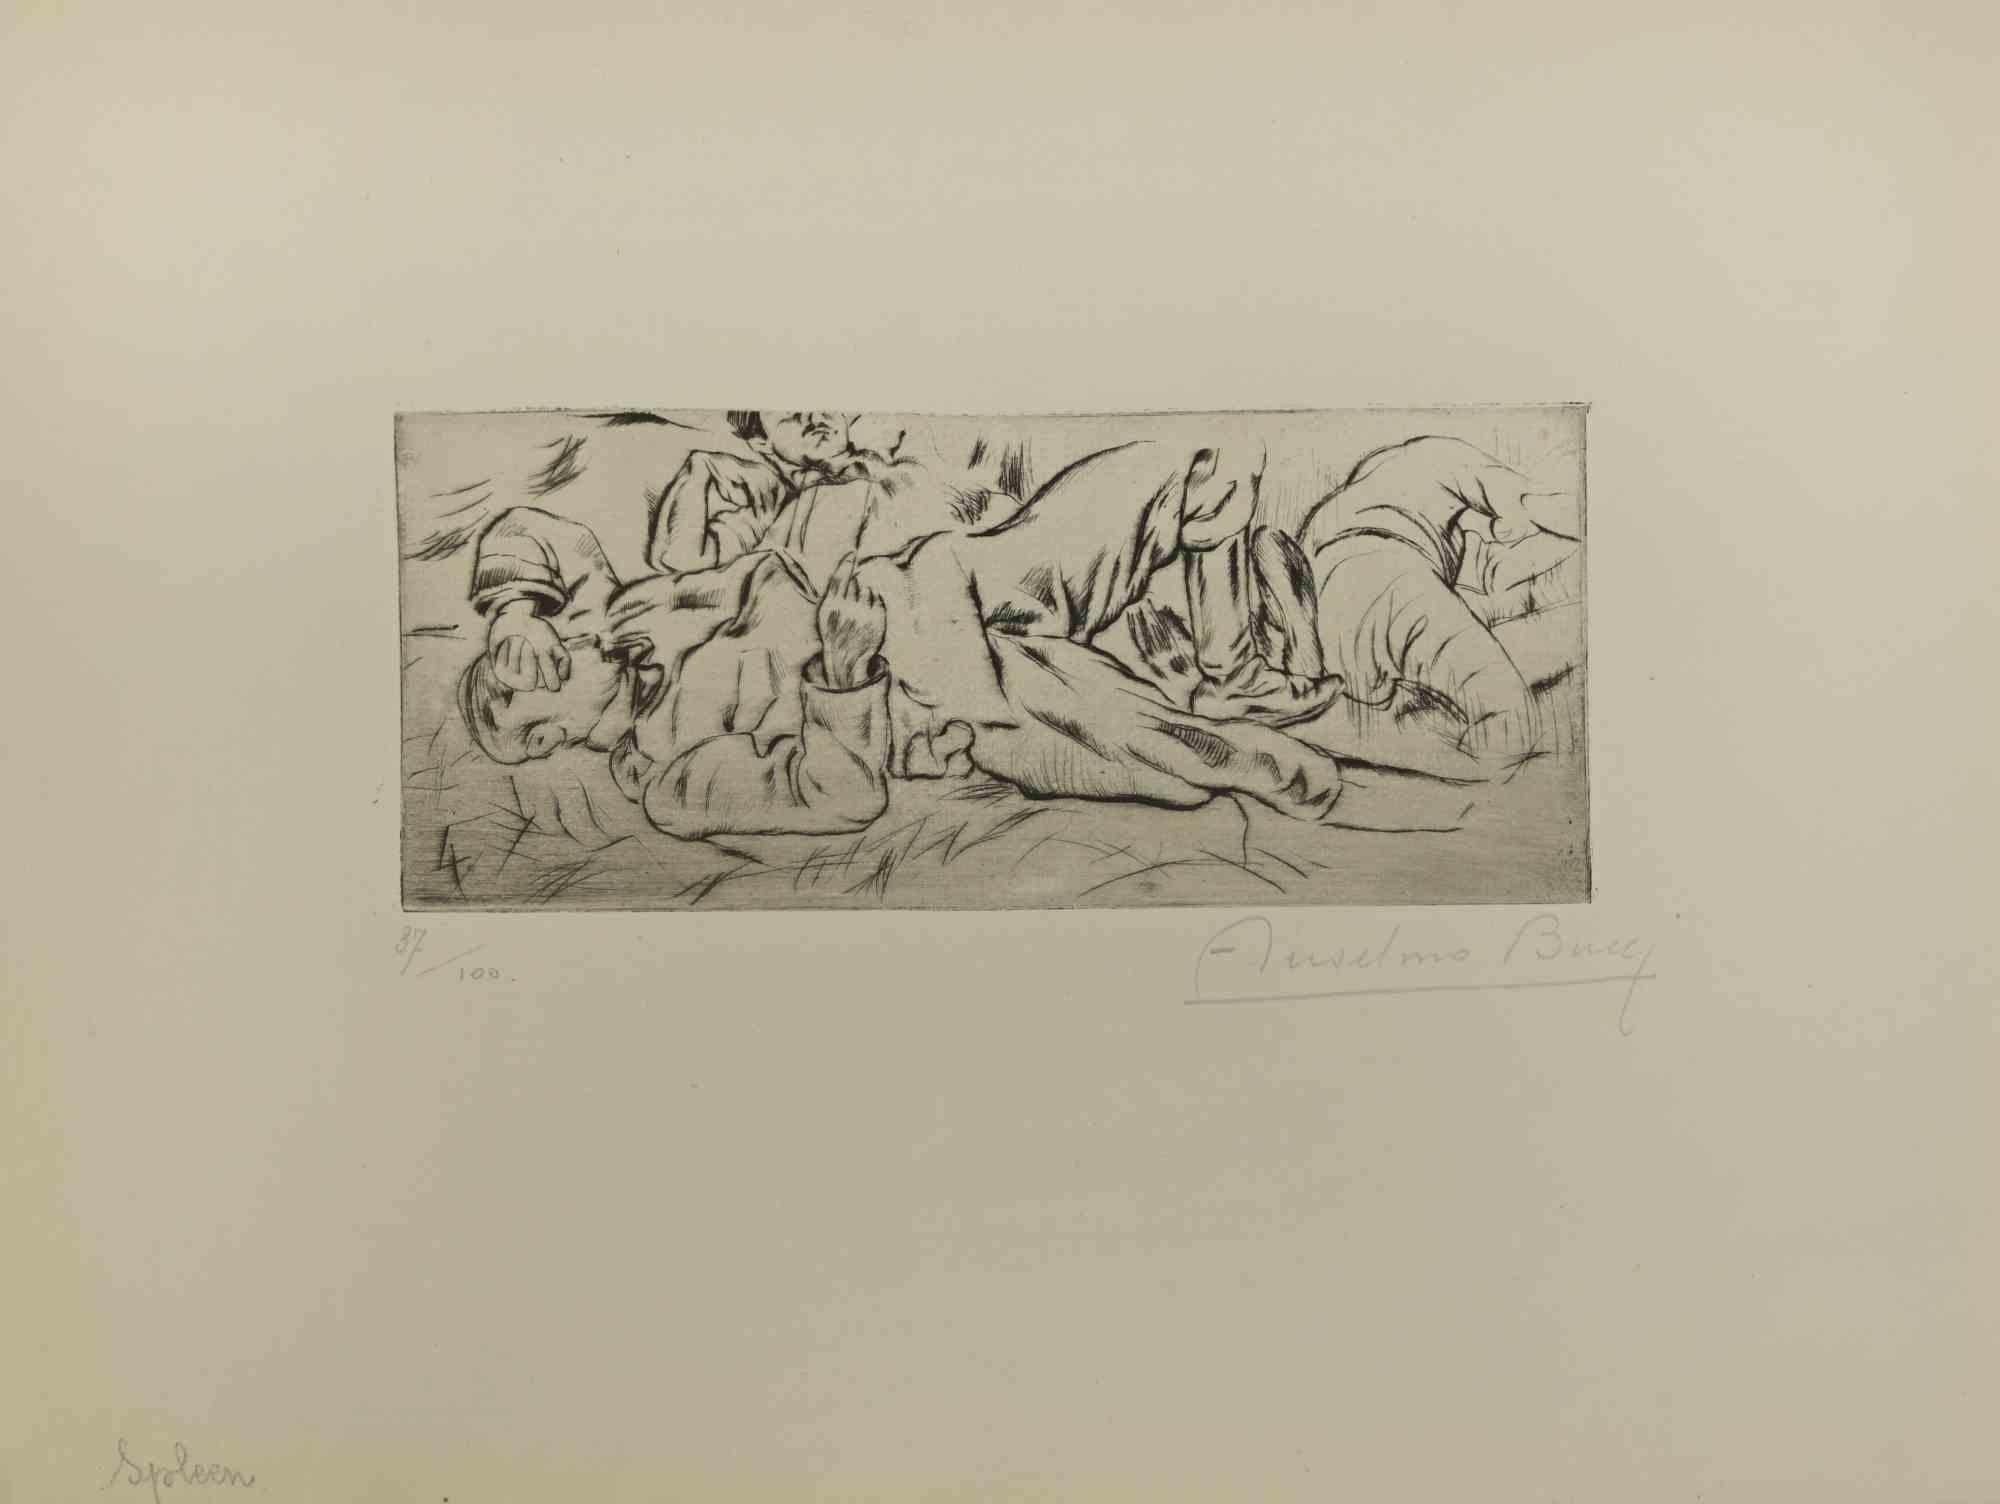 Manfredi - from "Le Croquis du Front Italien" is an Artwork, Drypoint,  realized by the Italian Artist Anselmo Bucci, in 1917.

Hand signed on the right margin . Edition n. 37/100 specimens on Hollande paper. From the collection: “Croquis du Front